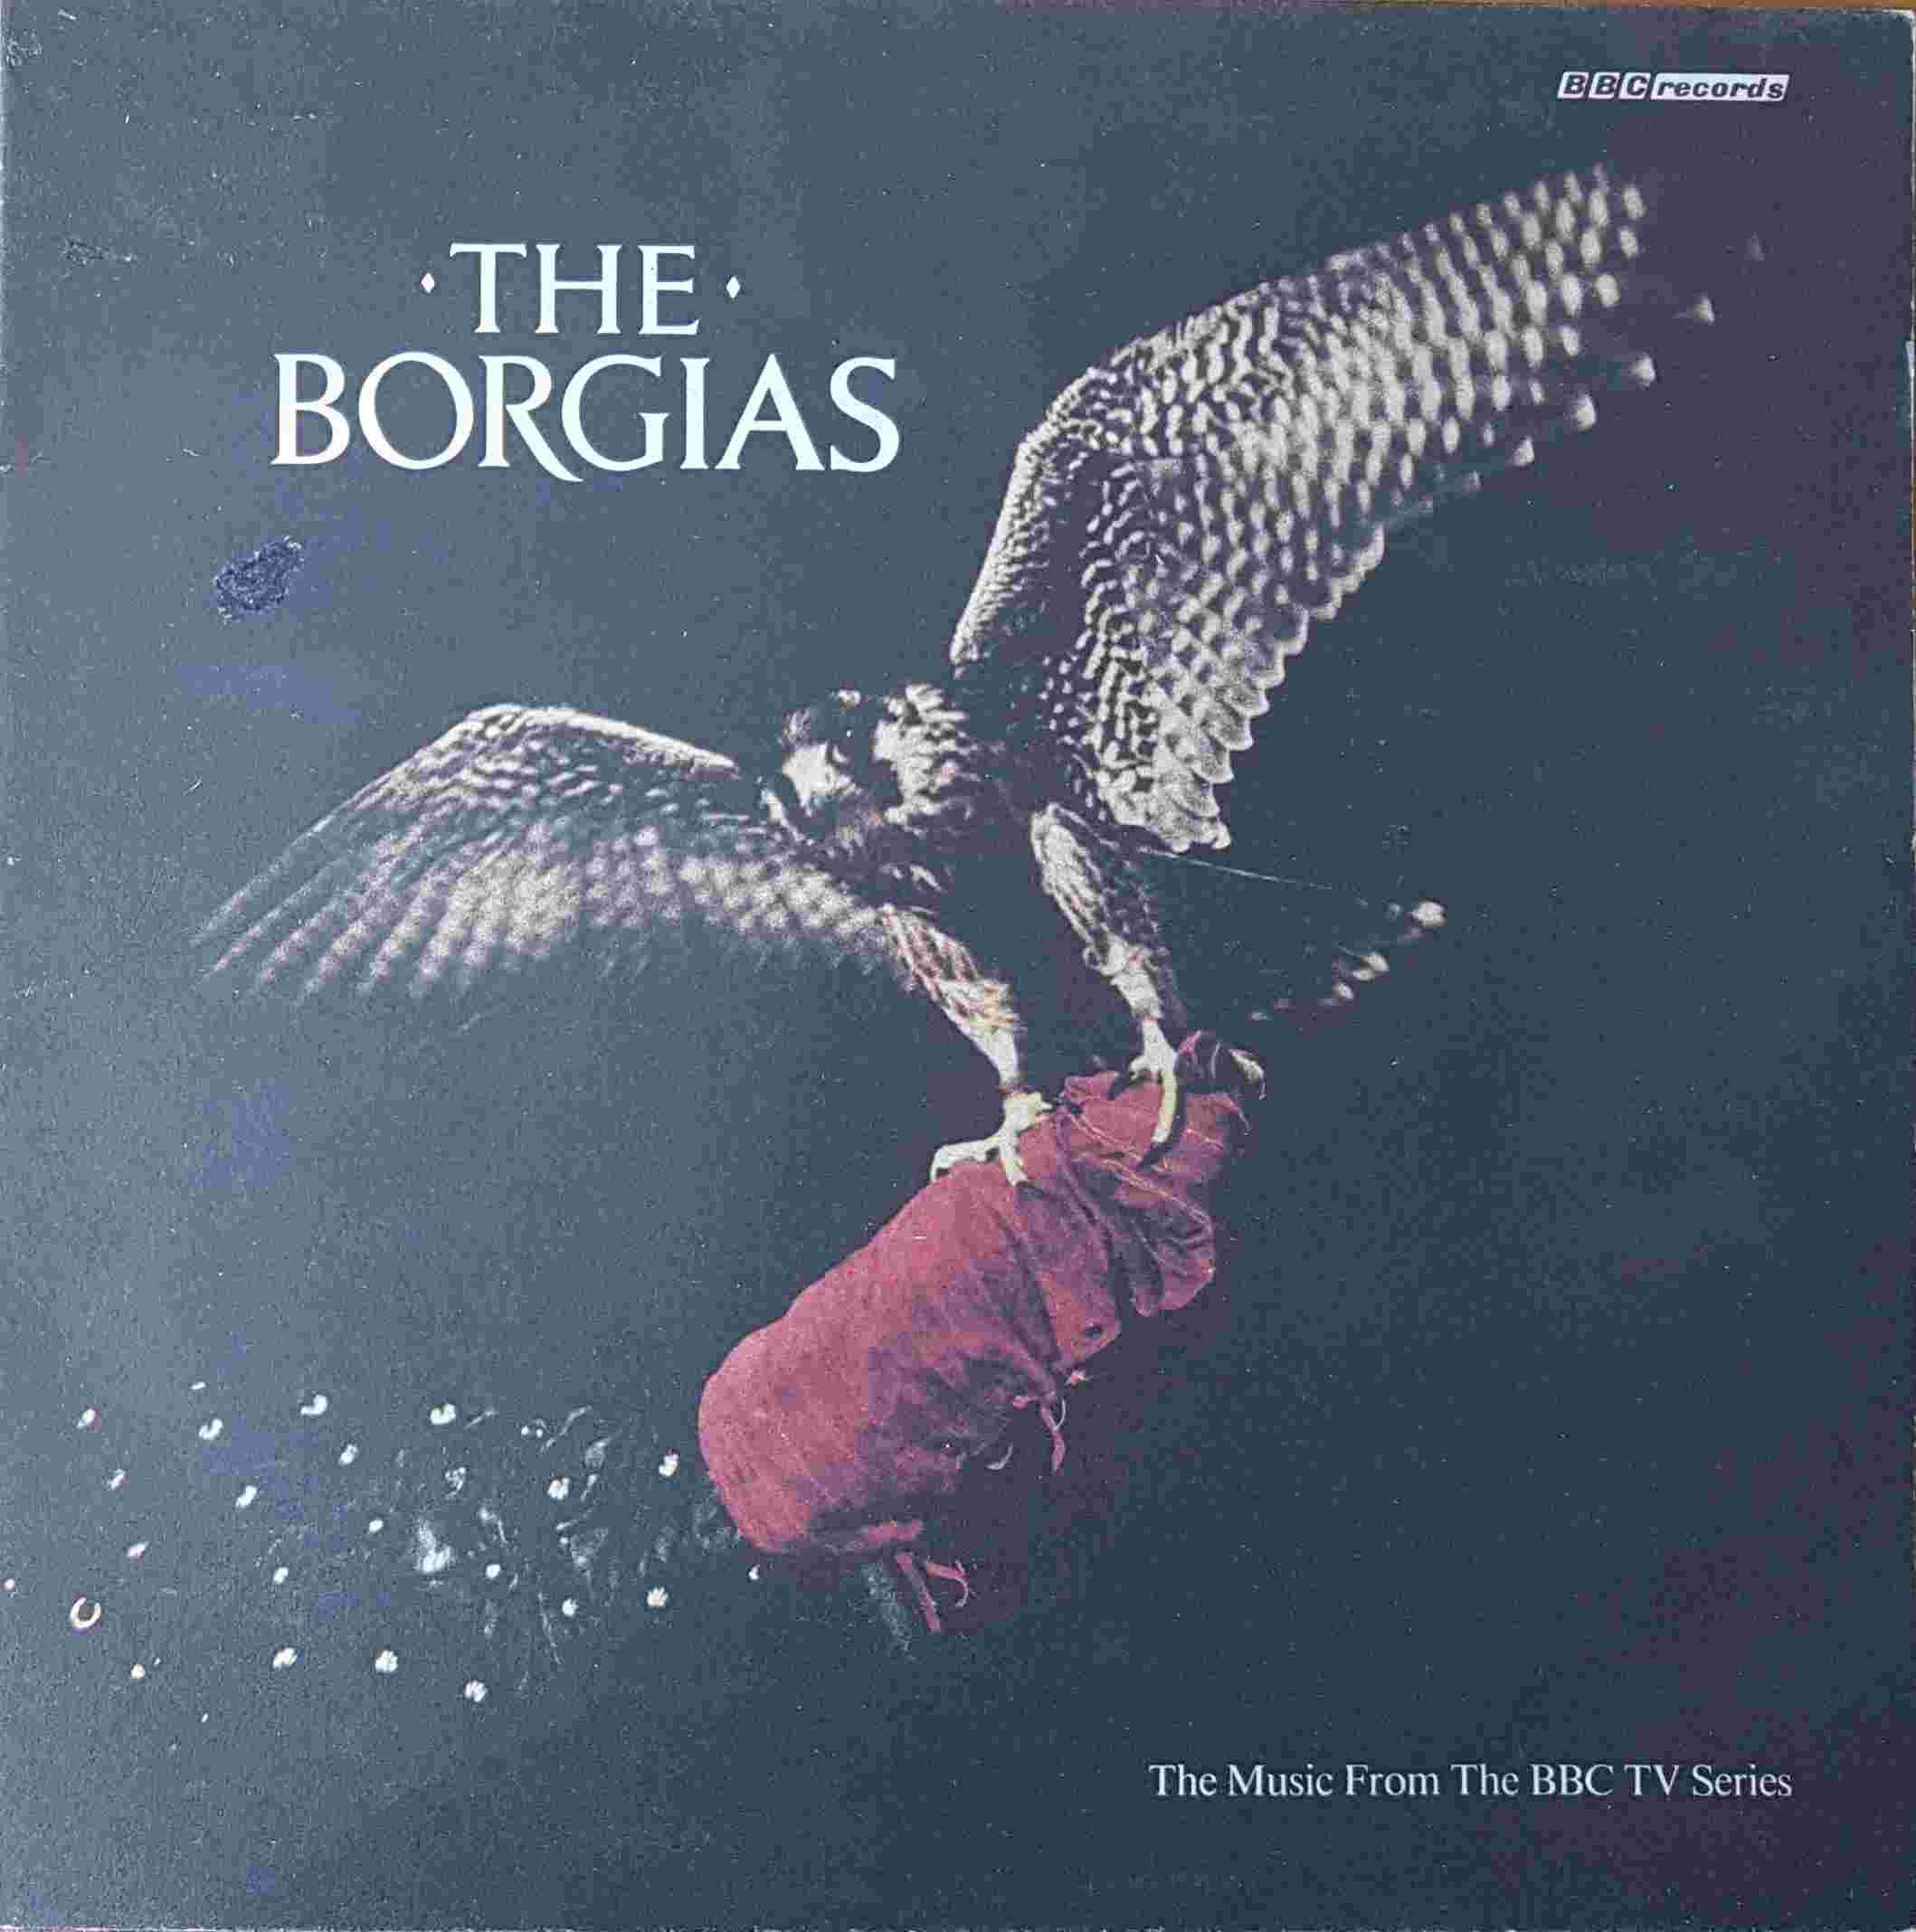 Picture of REP 428 Borgias by artist George Delerue from the BBC albums - Records and Tapes library